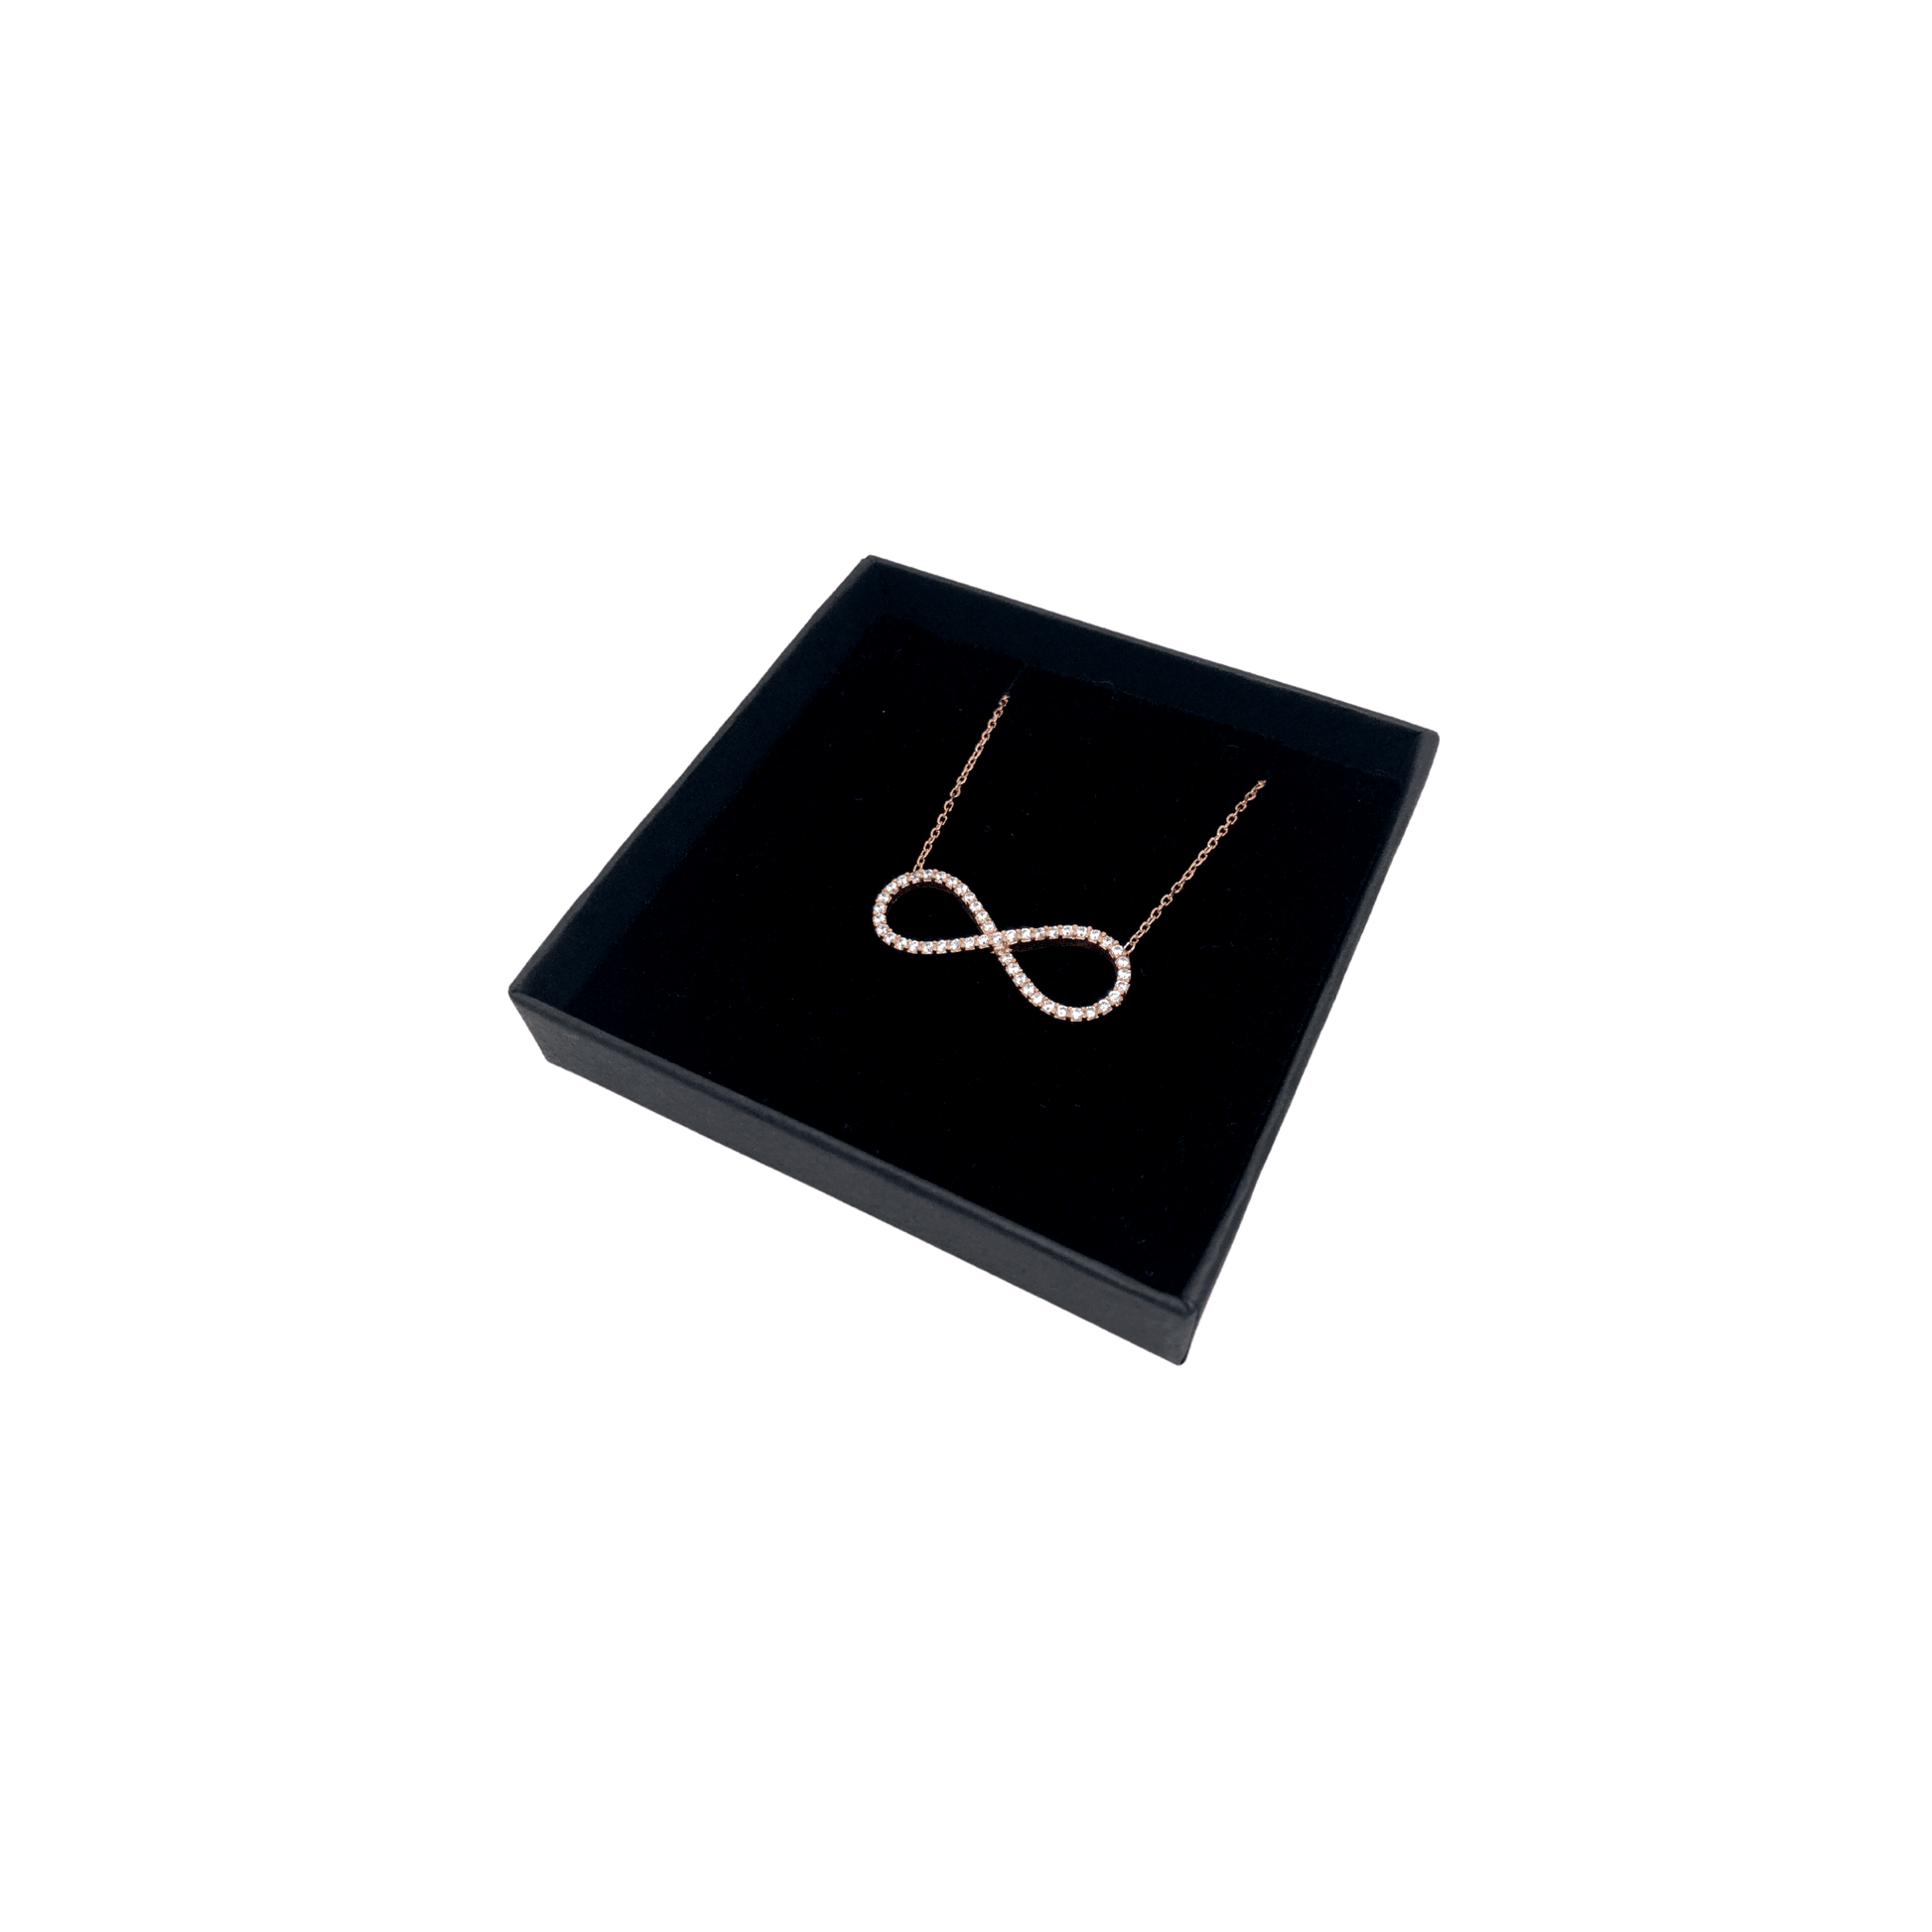 Italian Sterling Silver Infinity Necklace in Rose Gold and Crystals - Naked Nation UK